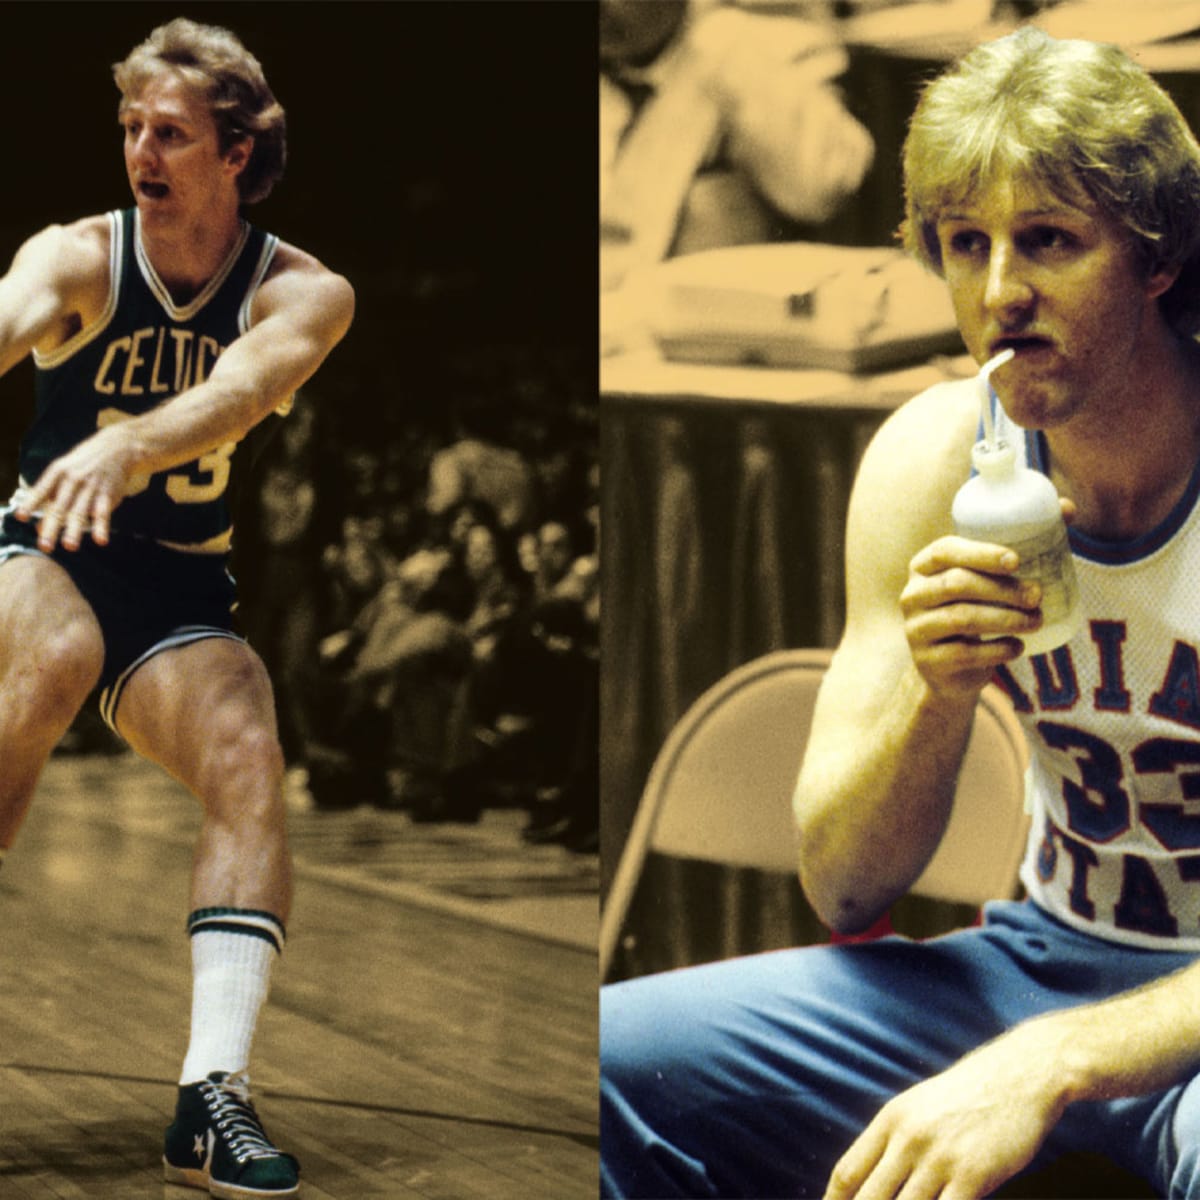 Larry Bird played in college all-star game injured due to promise